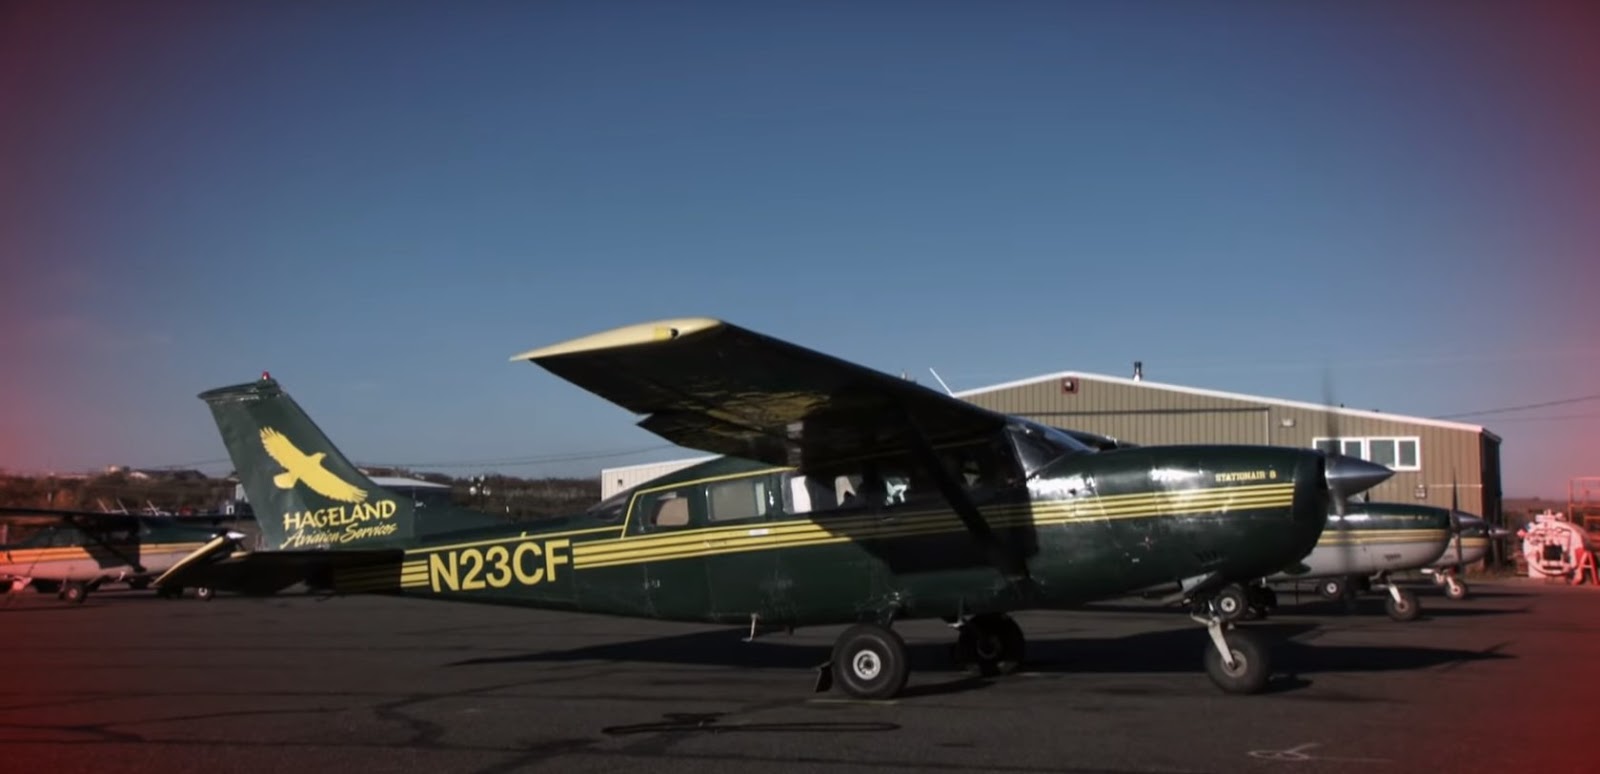 a green Cessna 207 parked at the airport area